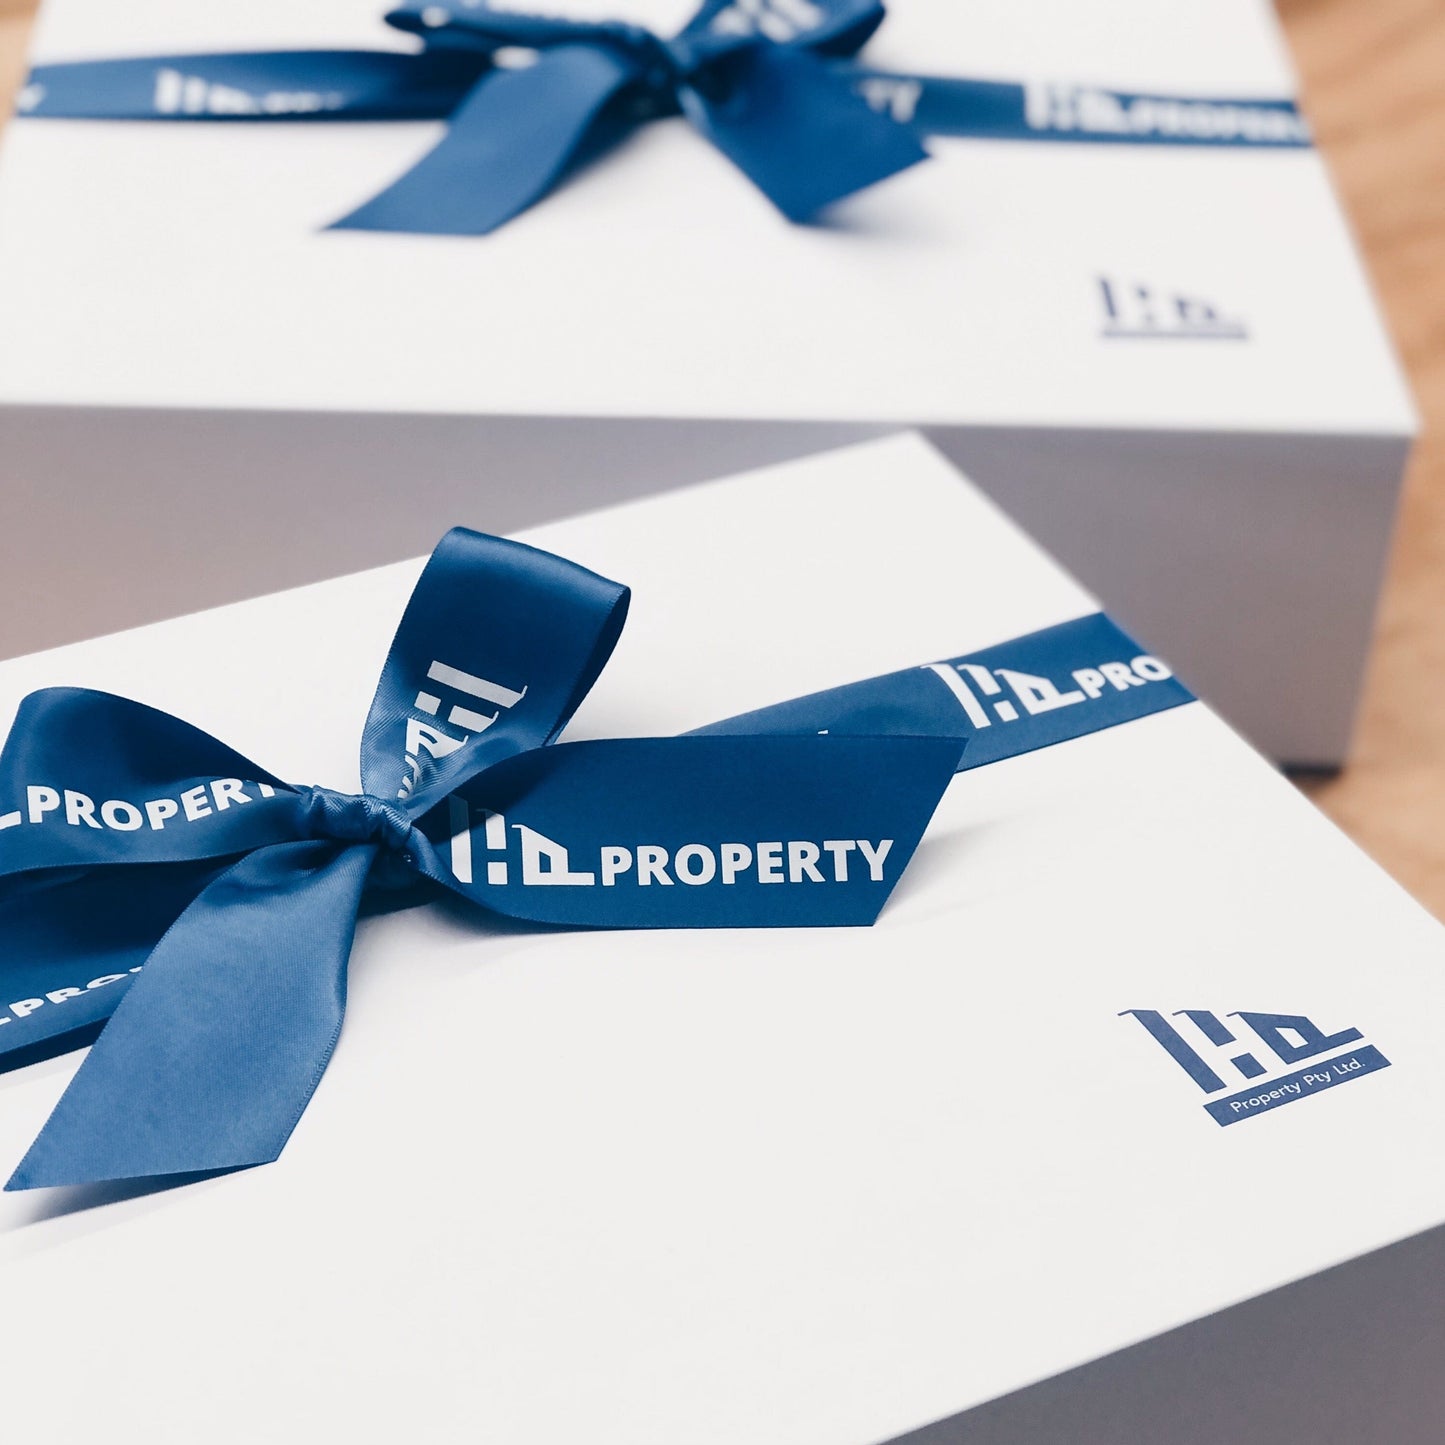 Stand out in the corporate gifting world with personalised branded ribbon.